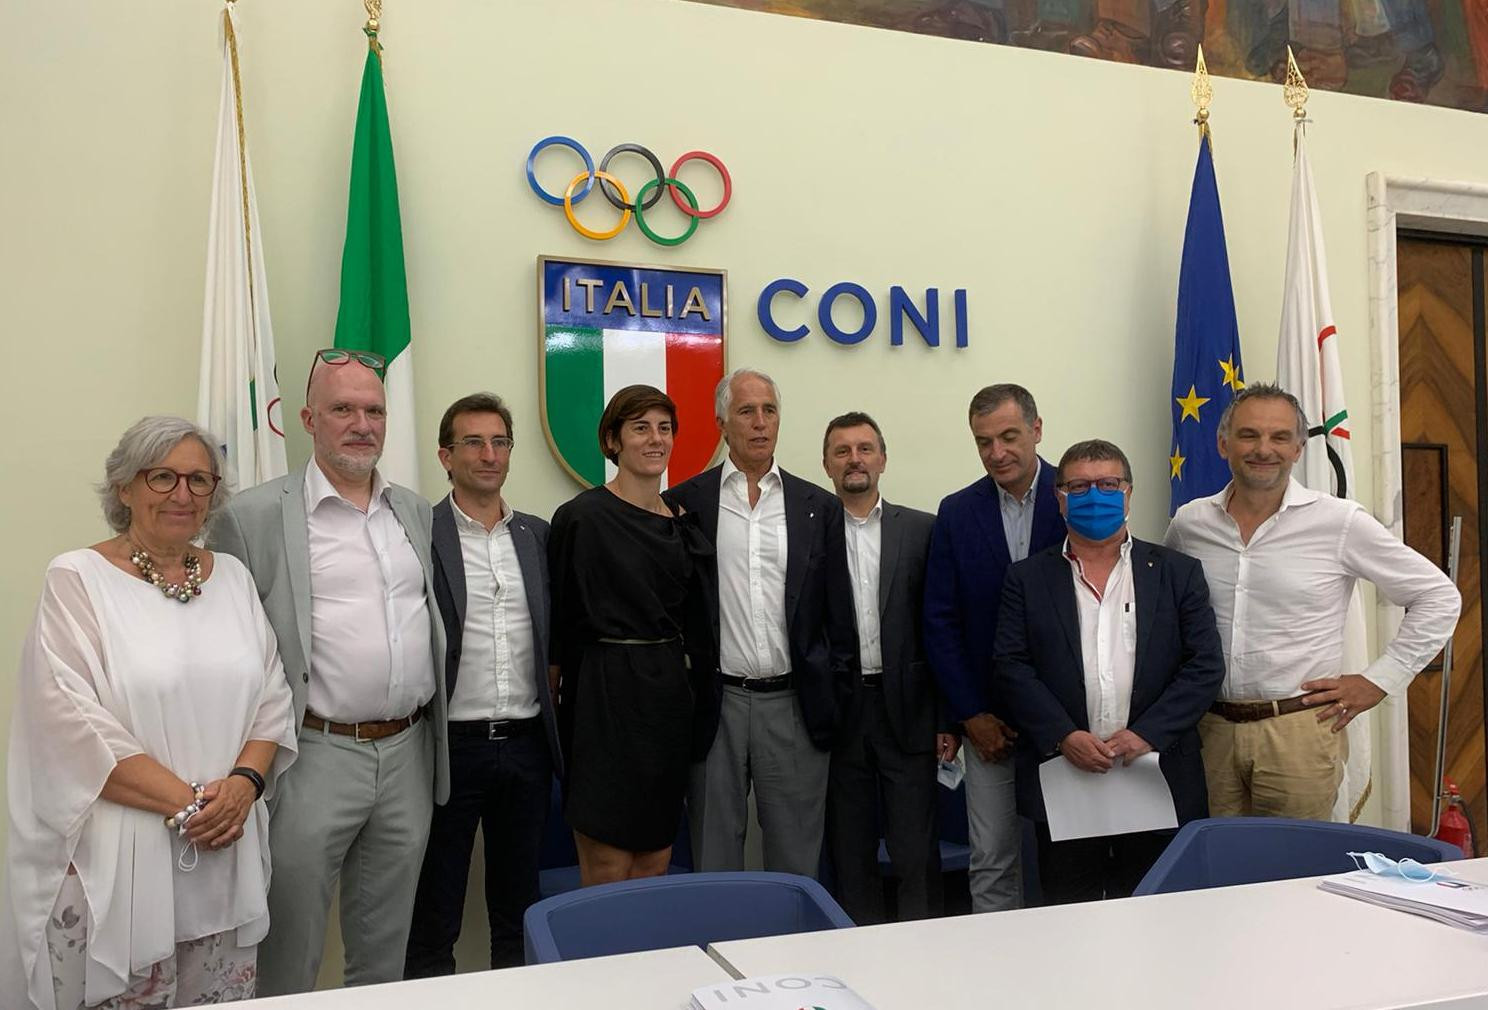 Representatives from the Italian Student Sport Association and Italian National Olympic Committee were present for the signing ©CONI